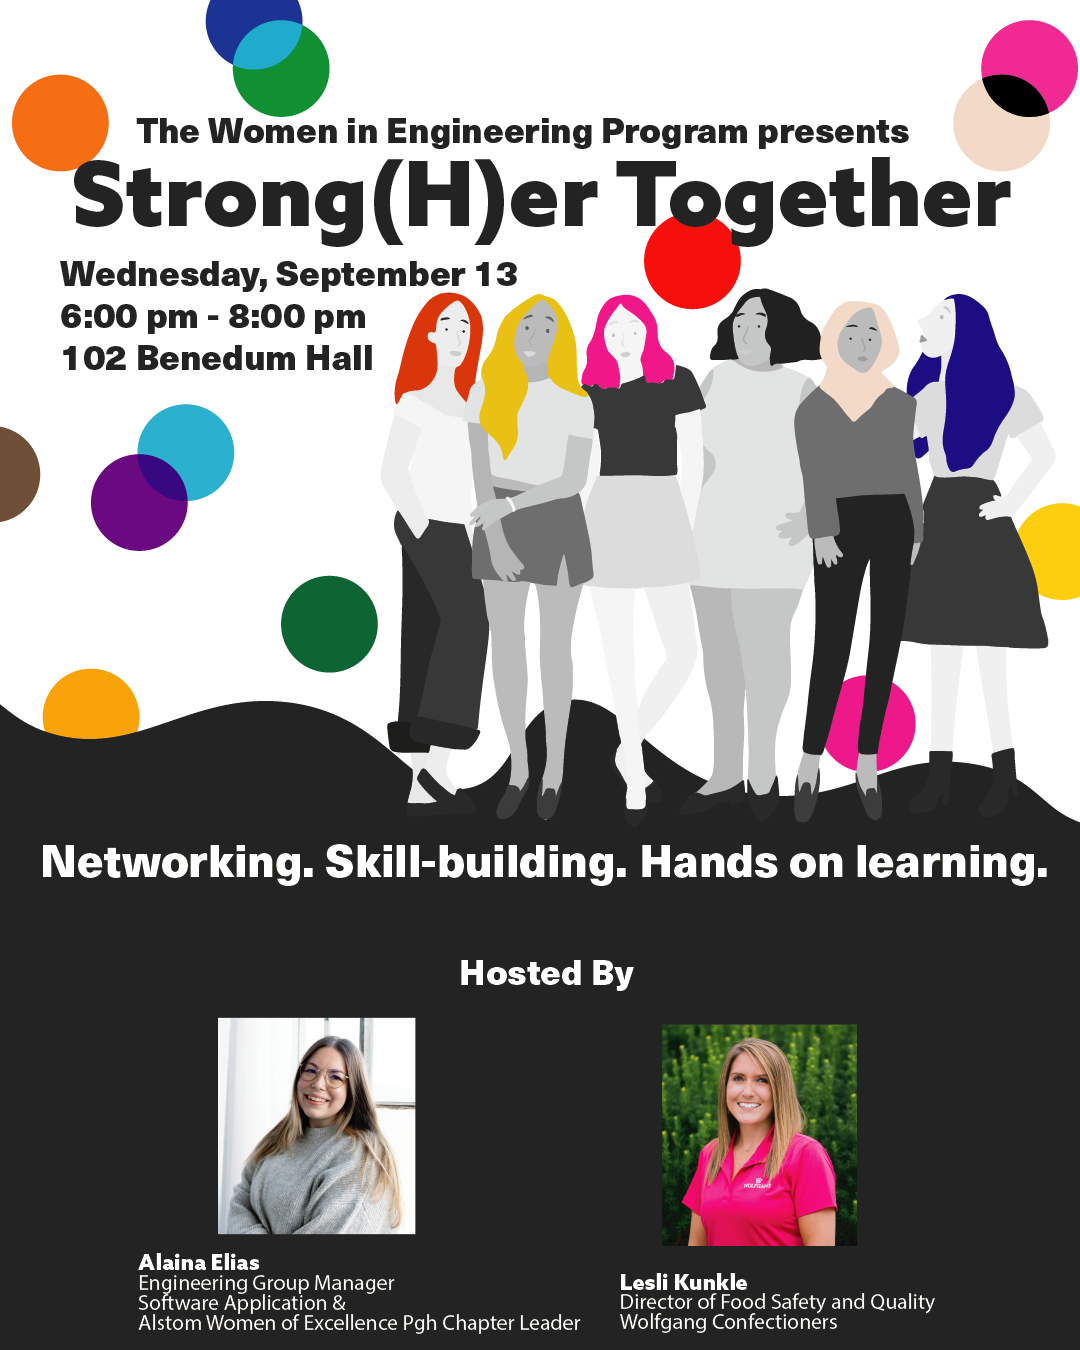 StrongHer Together event flyer, hosted by Alaina Elias and Lesli Kunkle